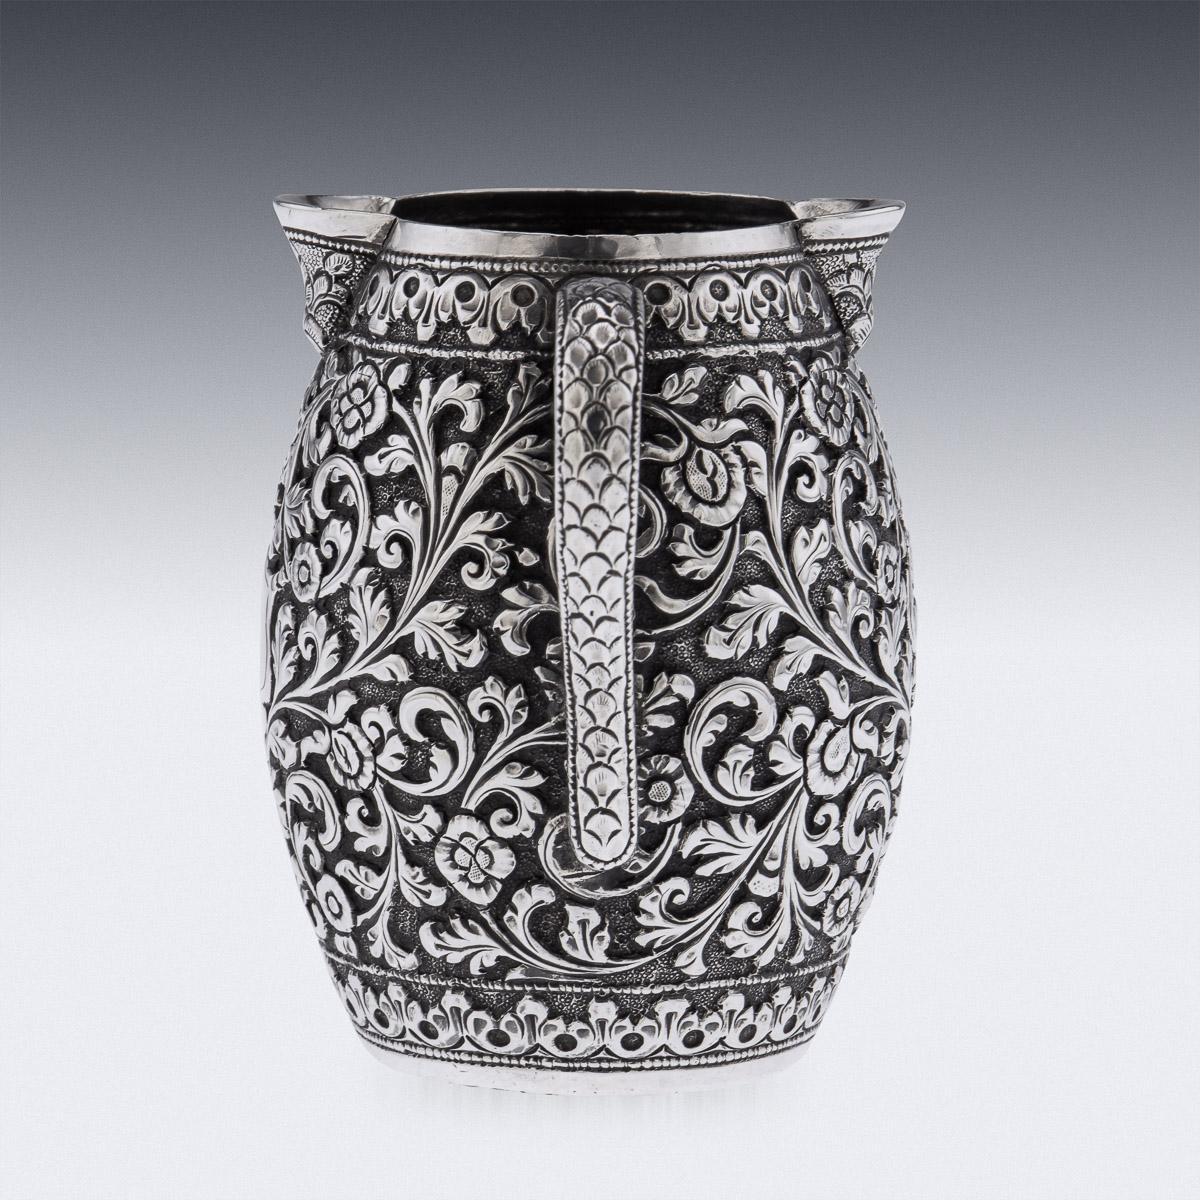 Antique late-19th Century Indian Kutch (Cutch), Bhuj, (Gujarat region) very unusual hand-crafted solid silver cream jug, finely chased throughout with scrolling leaves and floral patterns on a finely tooled matted ground. The center with a vacant